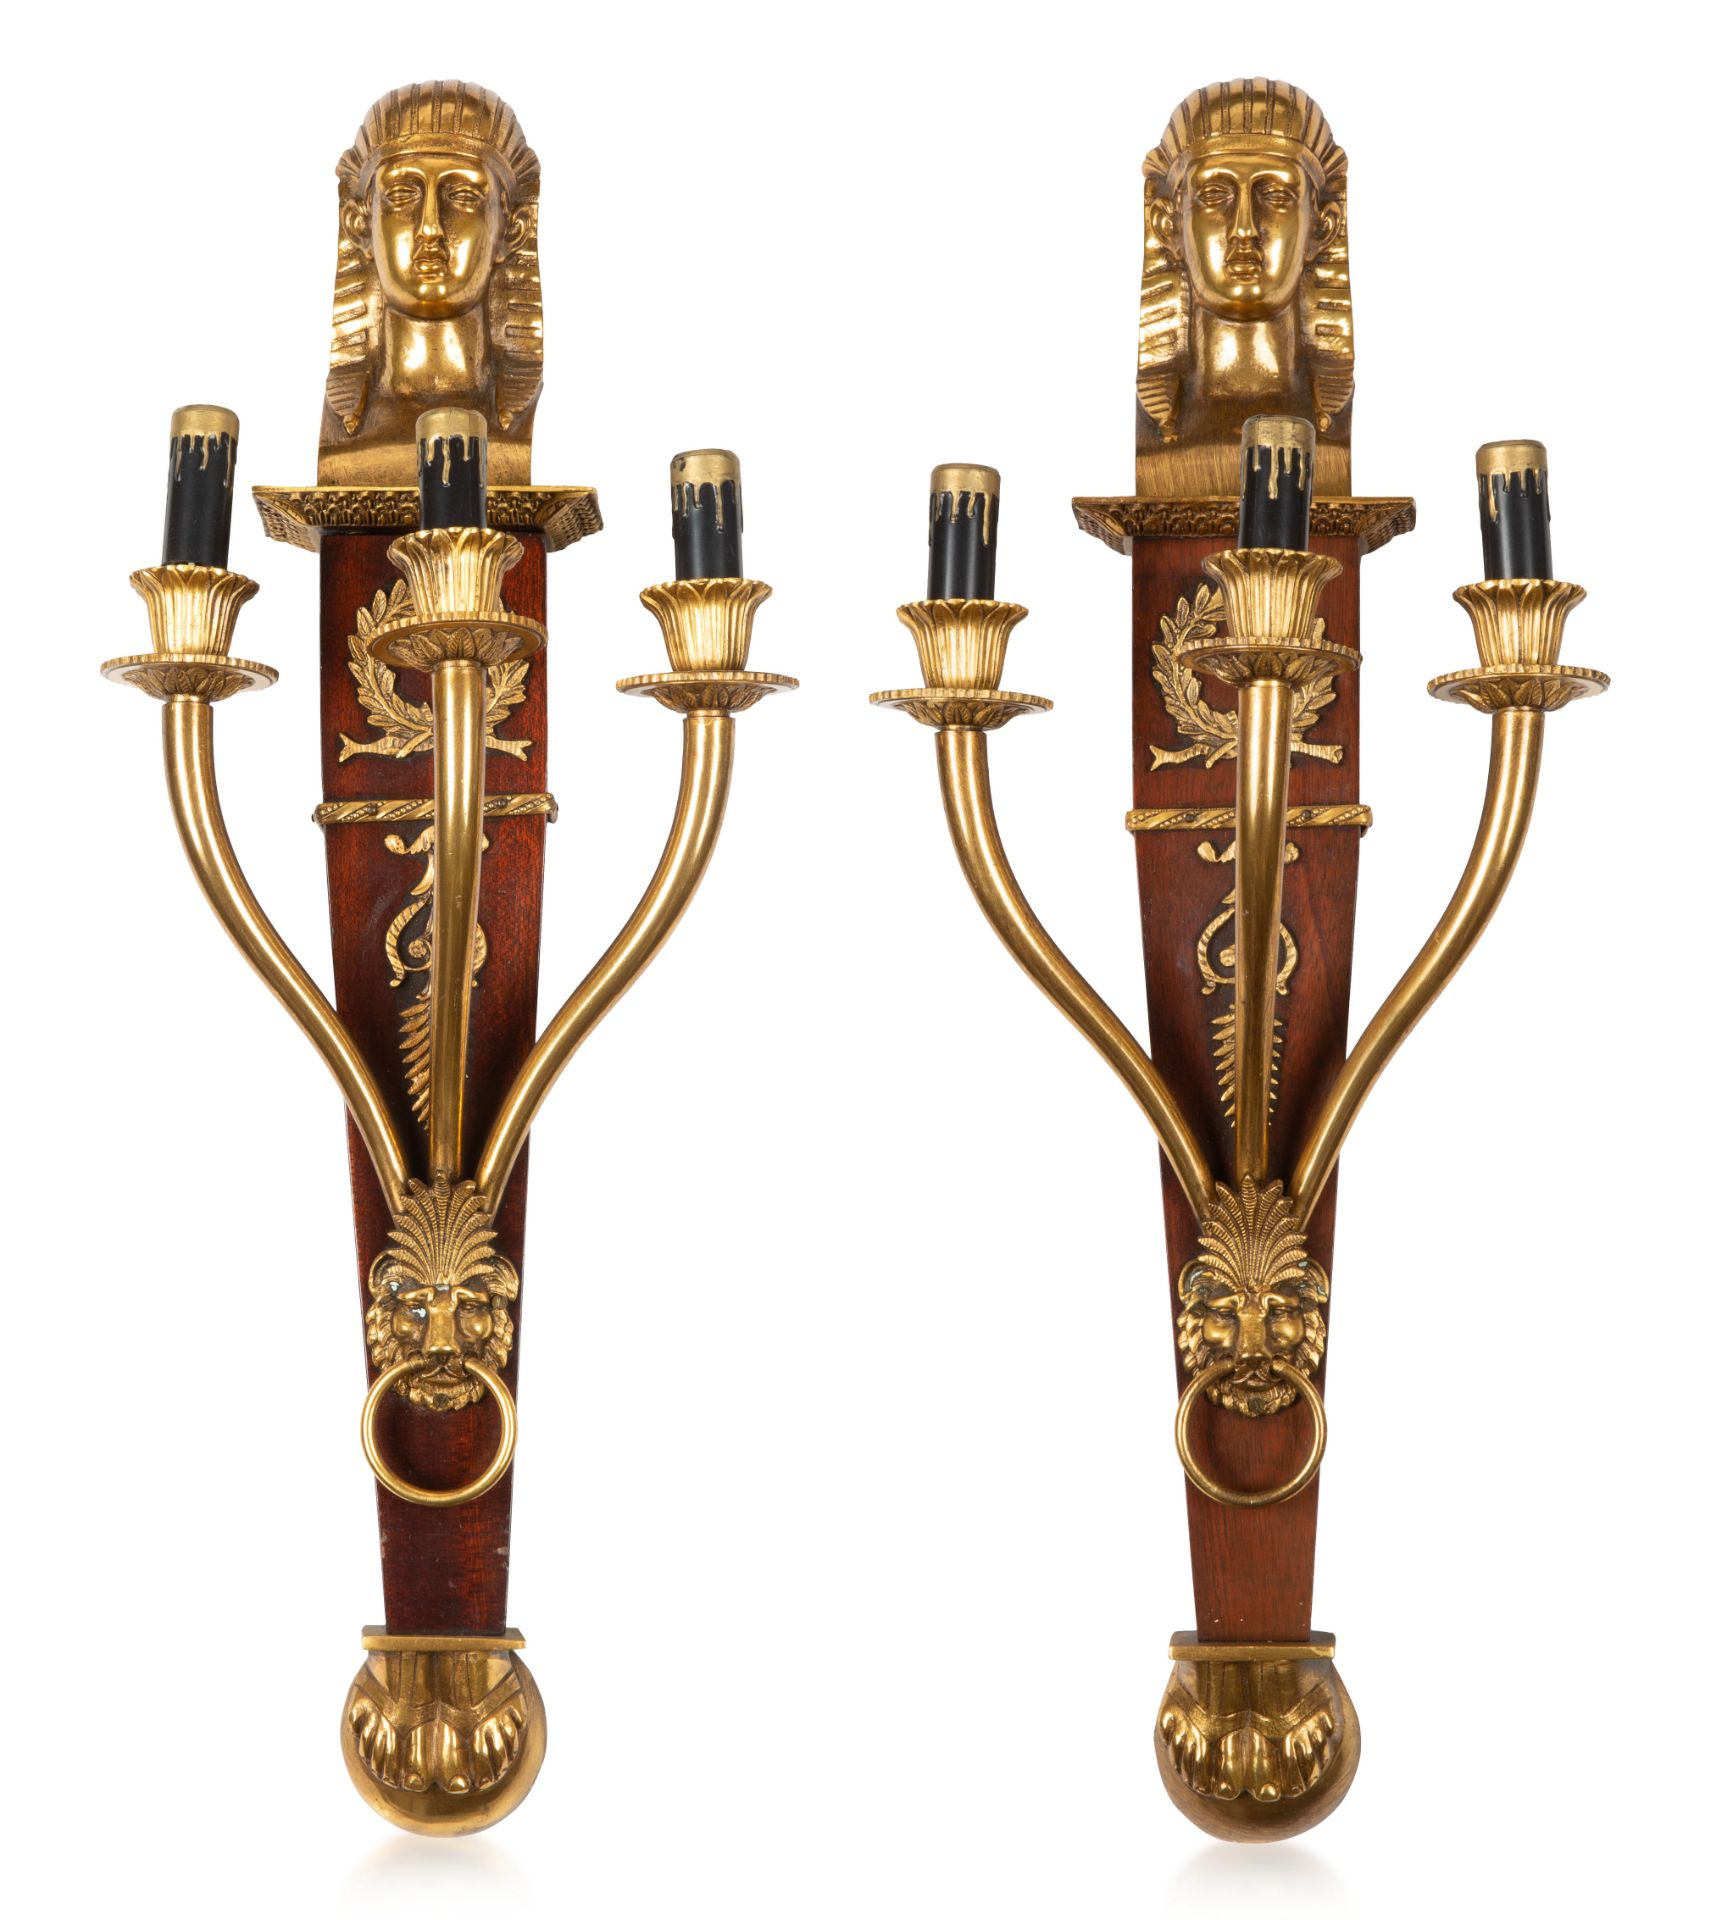 A PAIR OF EGYPTIAN REVIVAL WOOD AND GILT BRONZE SCONCES, 20TH CENTURY - Image 2 of 2